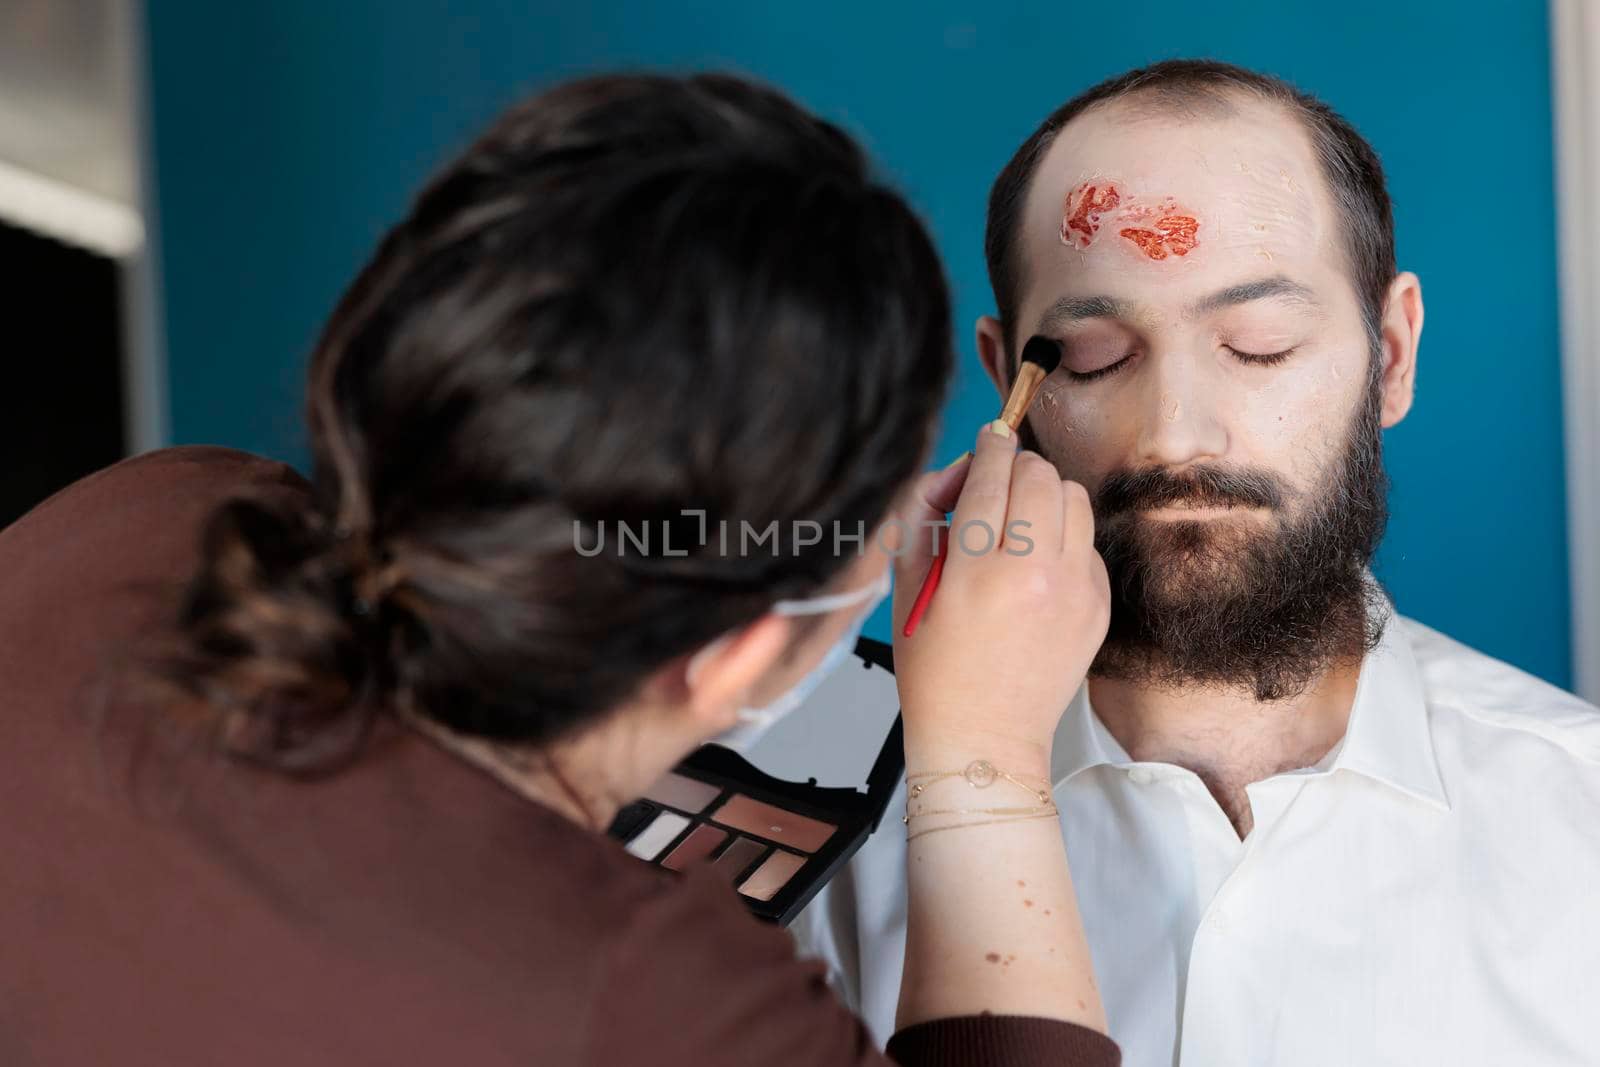 Artist using makeup effects to create zombie costume by DCStudio